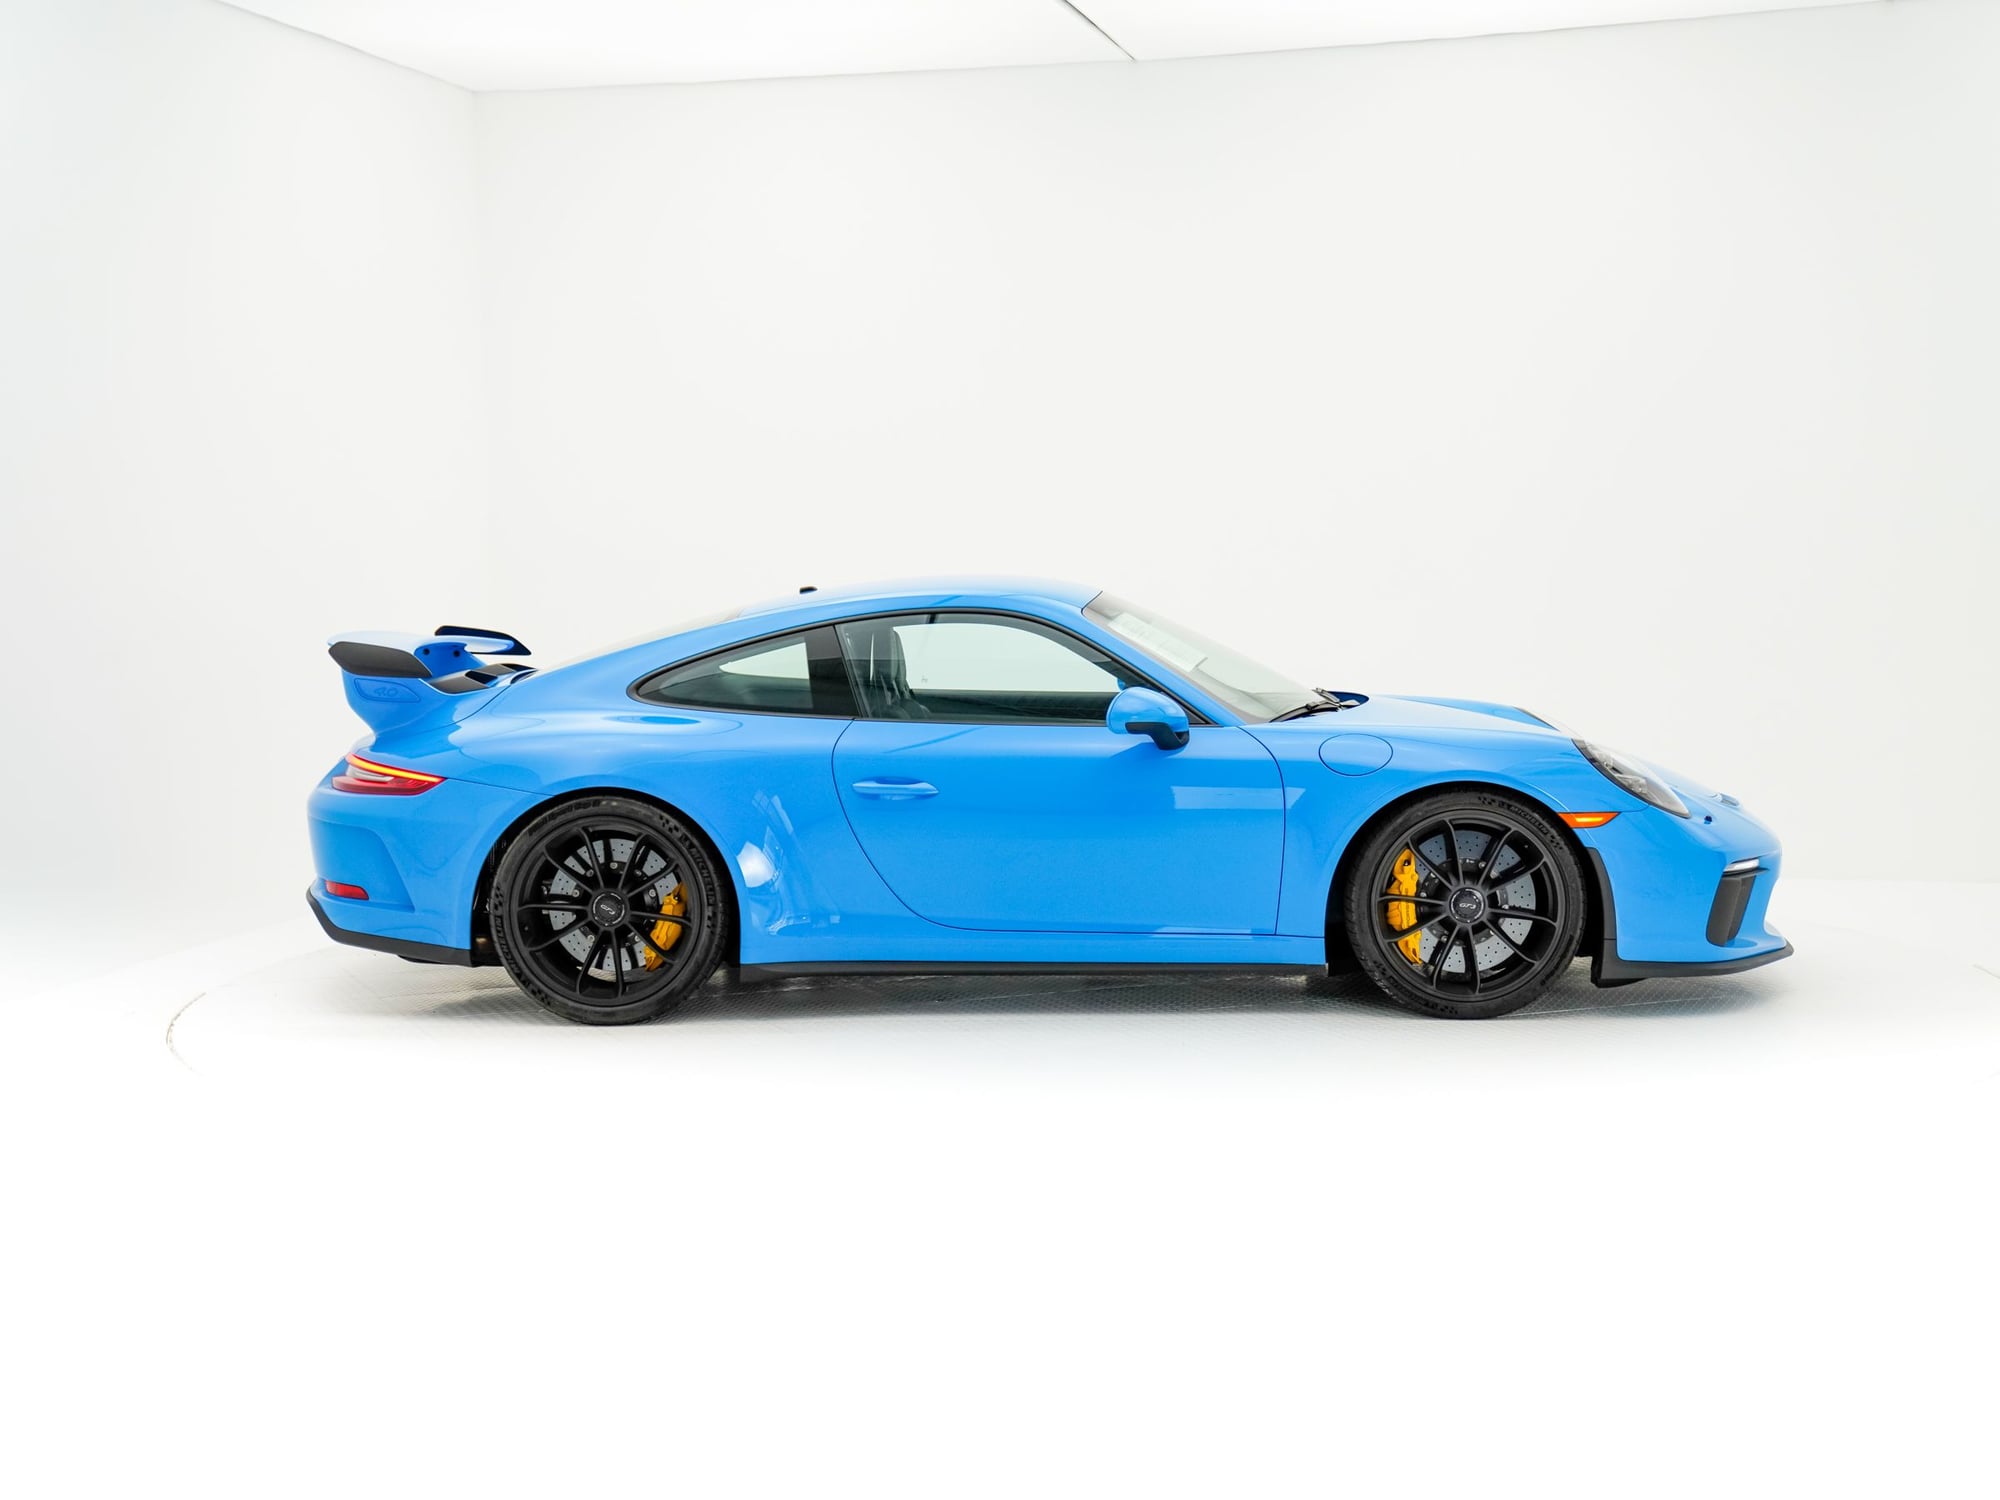 2018 Porsche GT3 - Dealer Inventory: Certified Pre-Owned 2018 Porsche 911 GT3 PTS Mexico Blue - Used - VIN WP0AC2A97JS174965 - 402 Miles - 6 cyl - 2WD - Manual - Coupe - Blue - Beaverton, OR 97005, United States